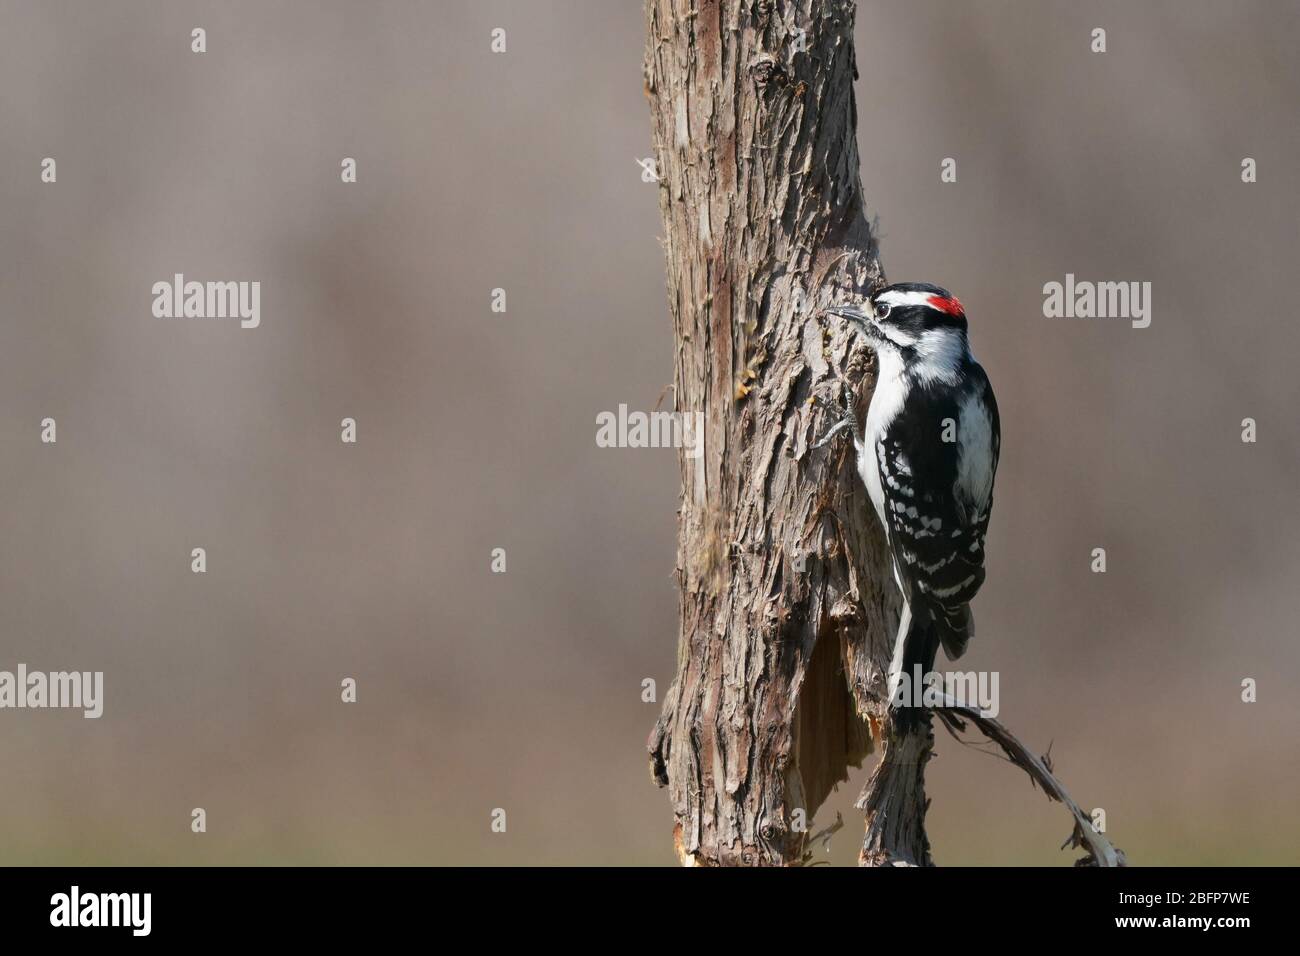 Downy Wood peckers male and females Stock Photo